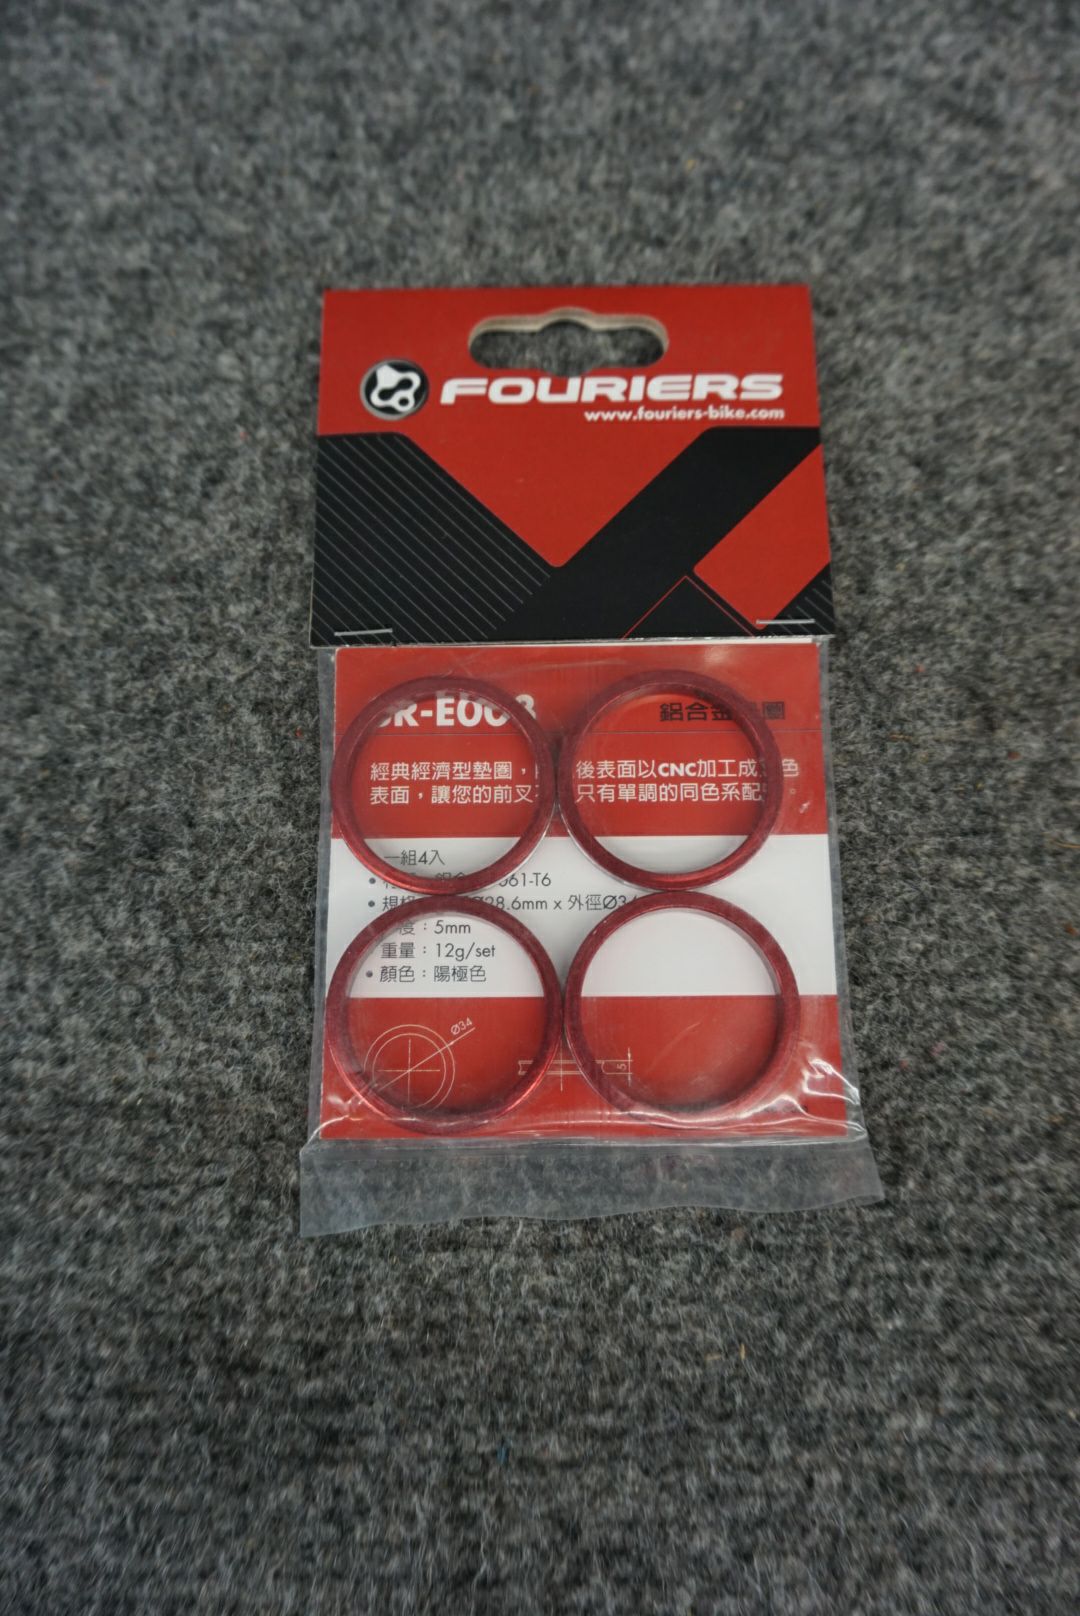 Fouriers 5mm Headset Spacers